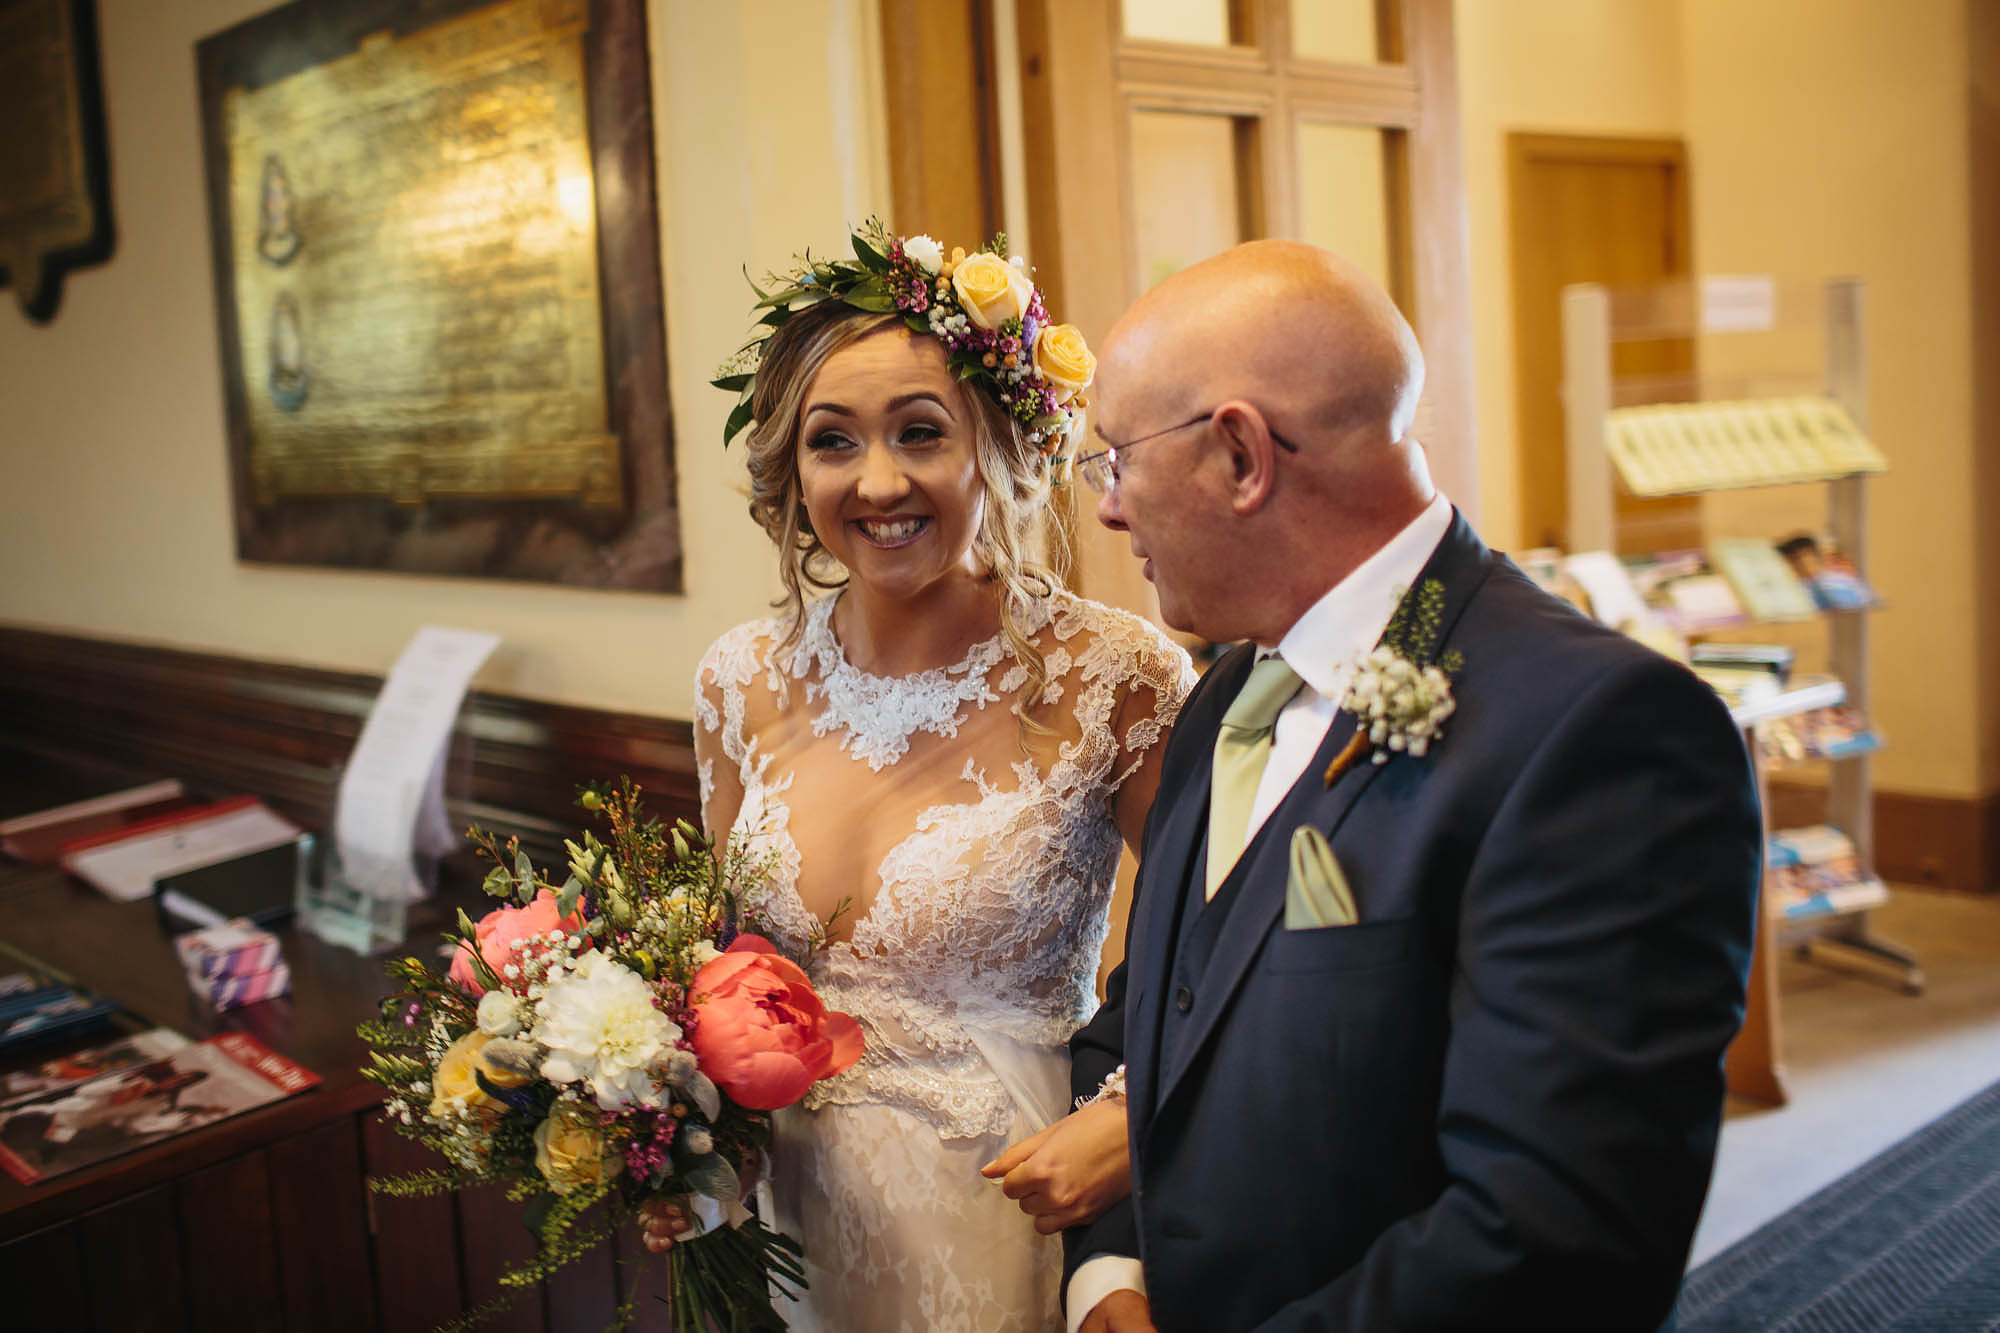 Bride laughing as her father walks her down the aisle at the church